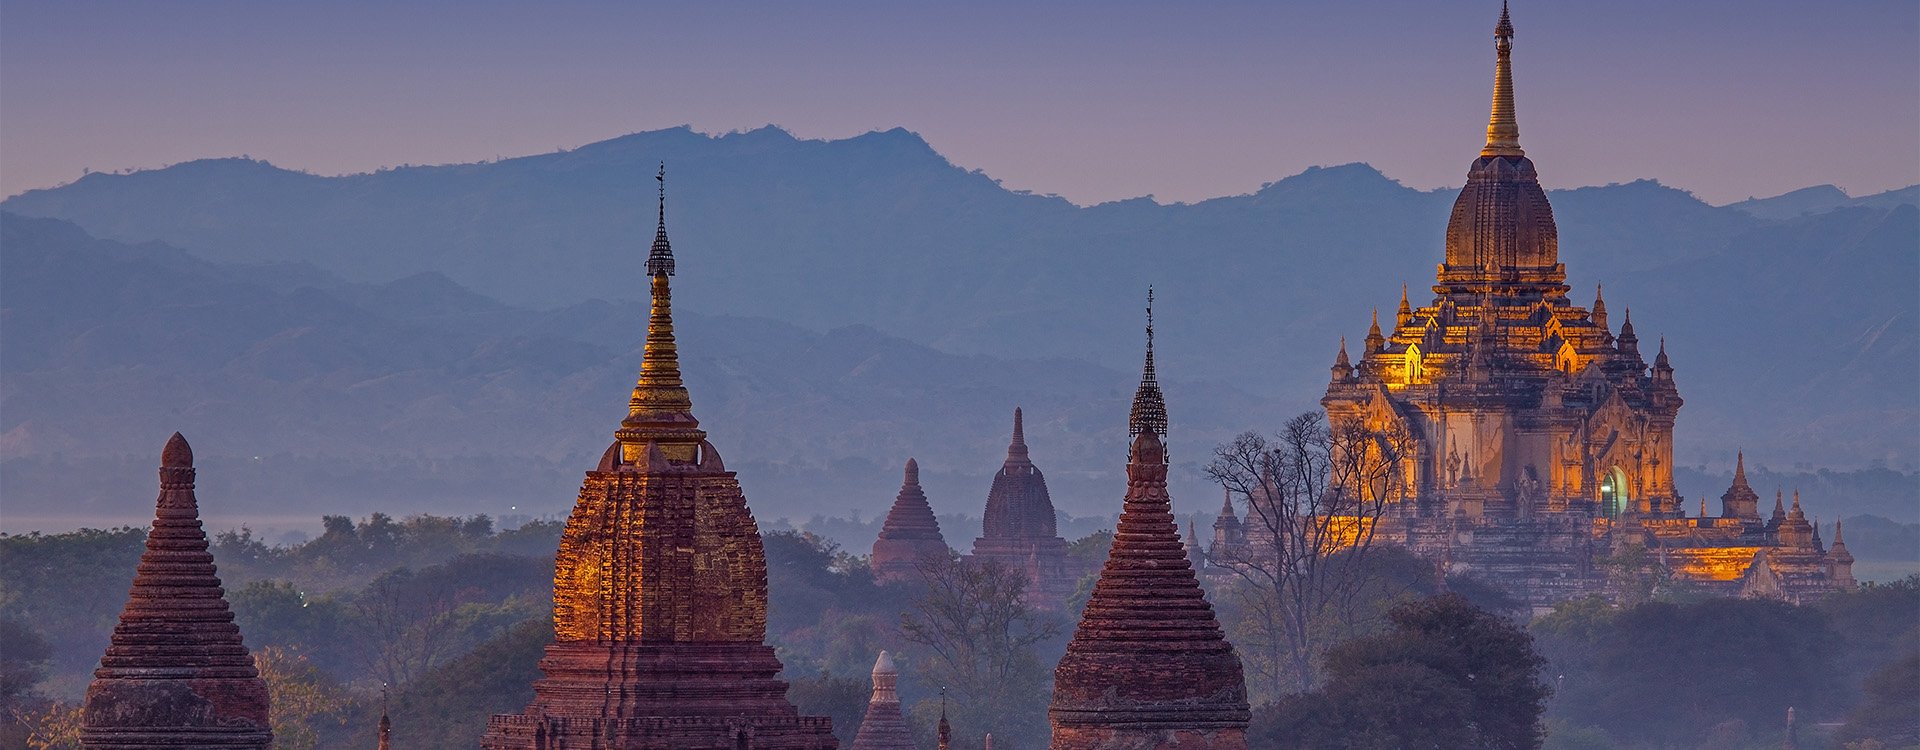 Myanmar, Bagan, ancient temple at sunset, UNESCO World Heritage Site